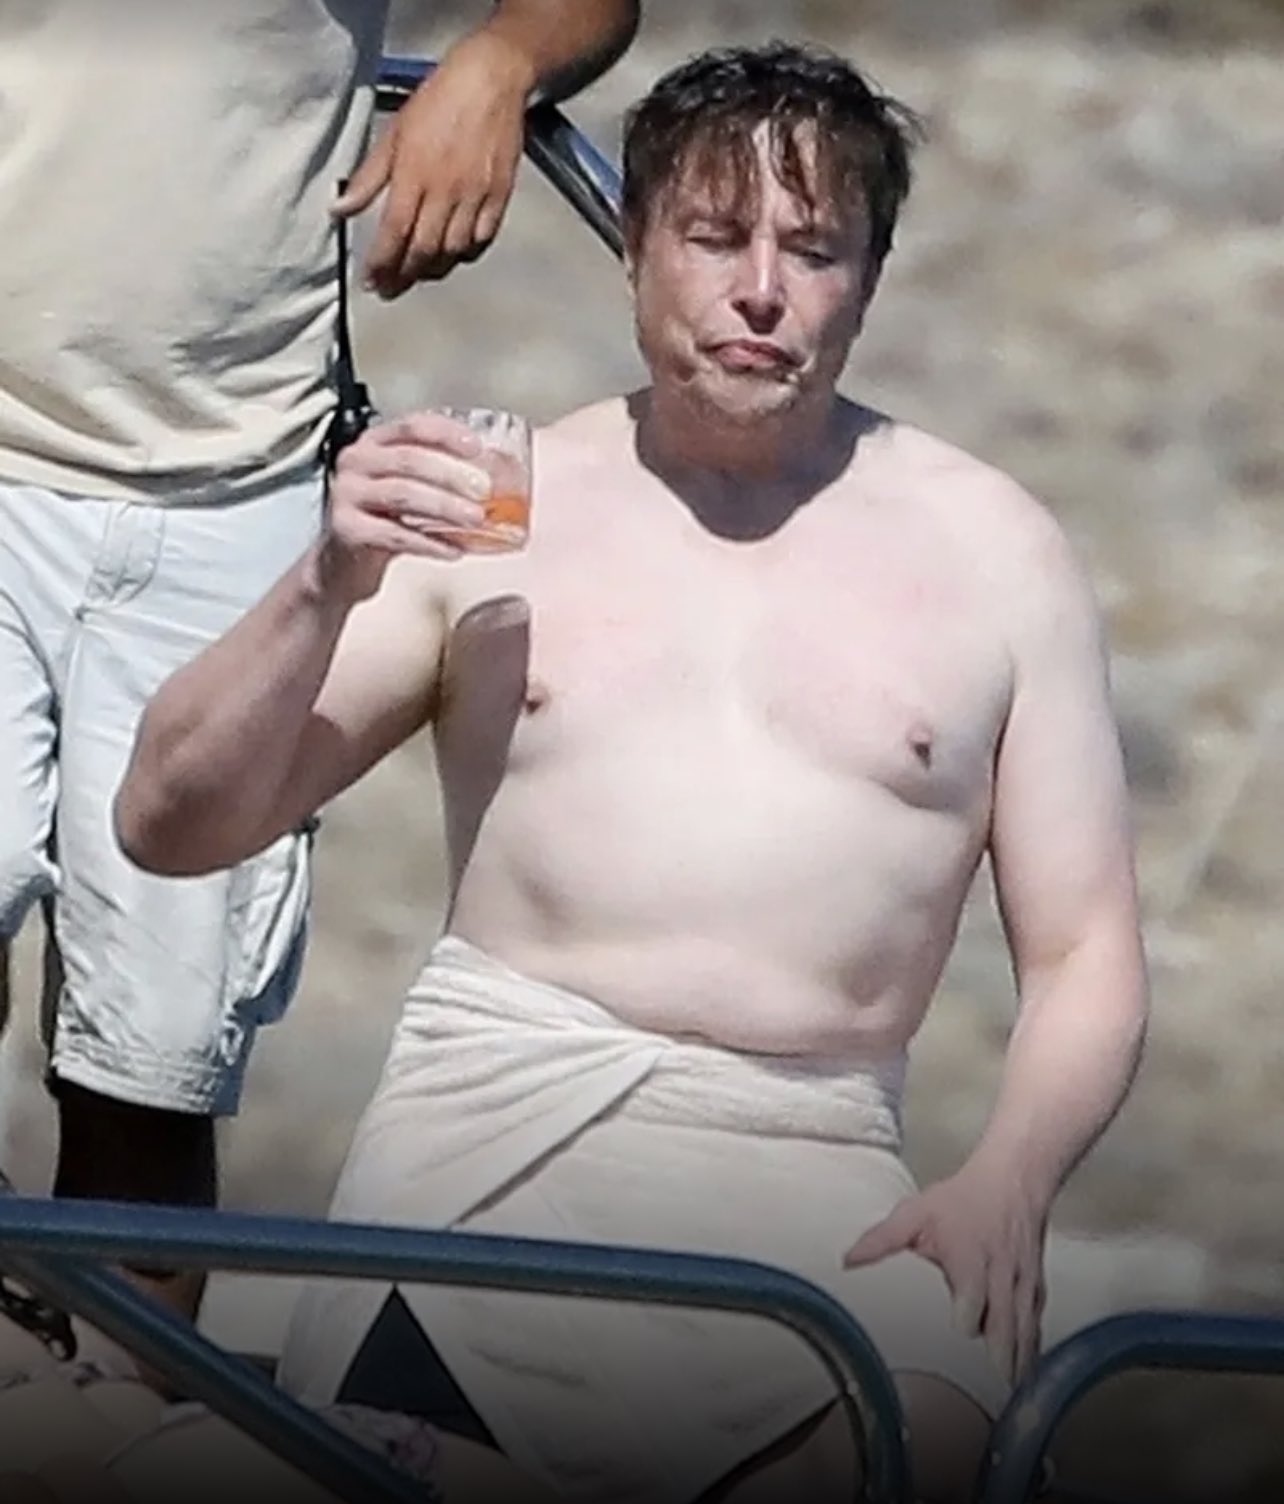 Elon musk shirtless pic from greece gone viral 